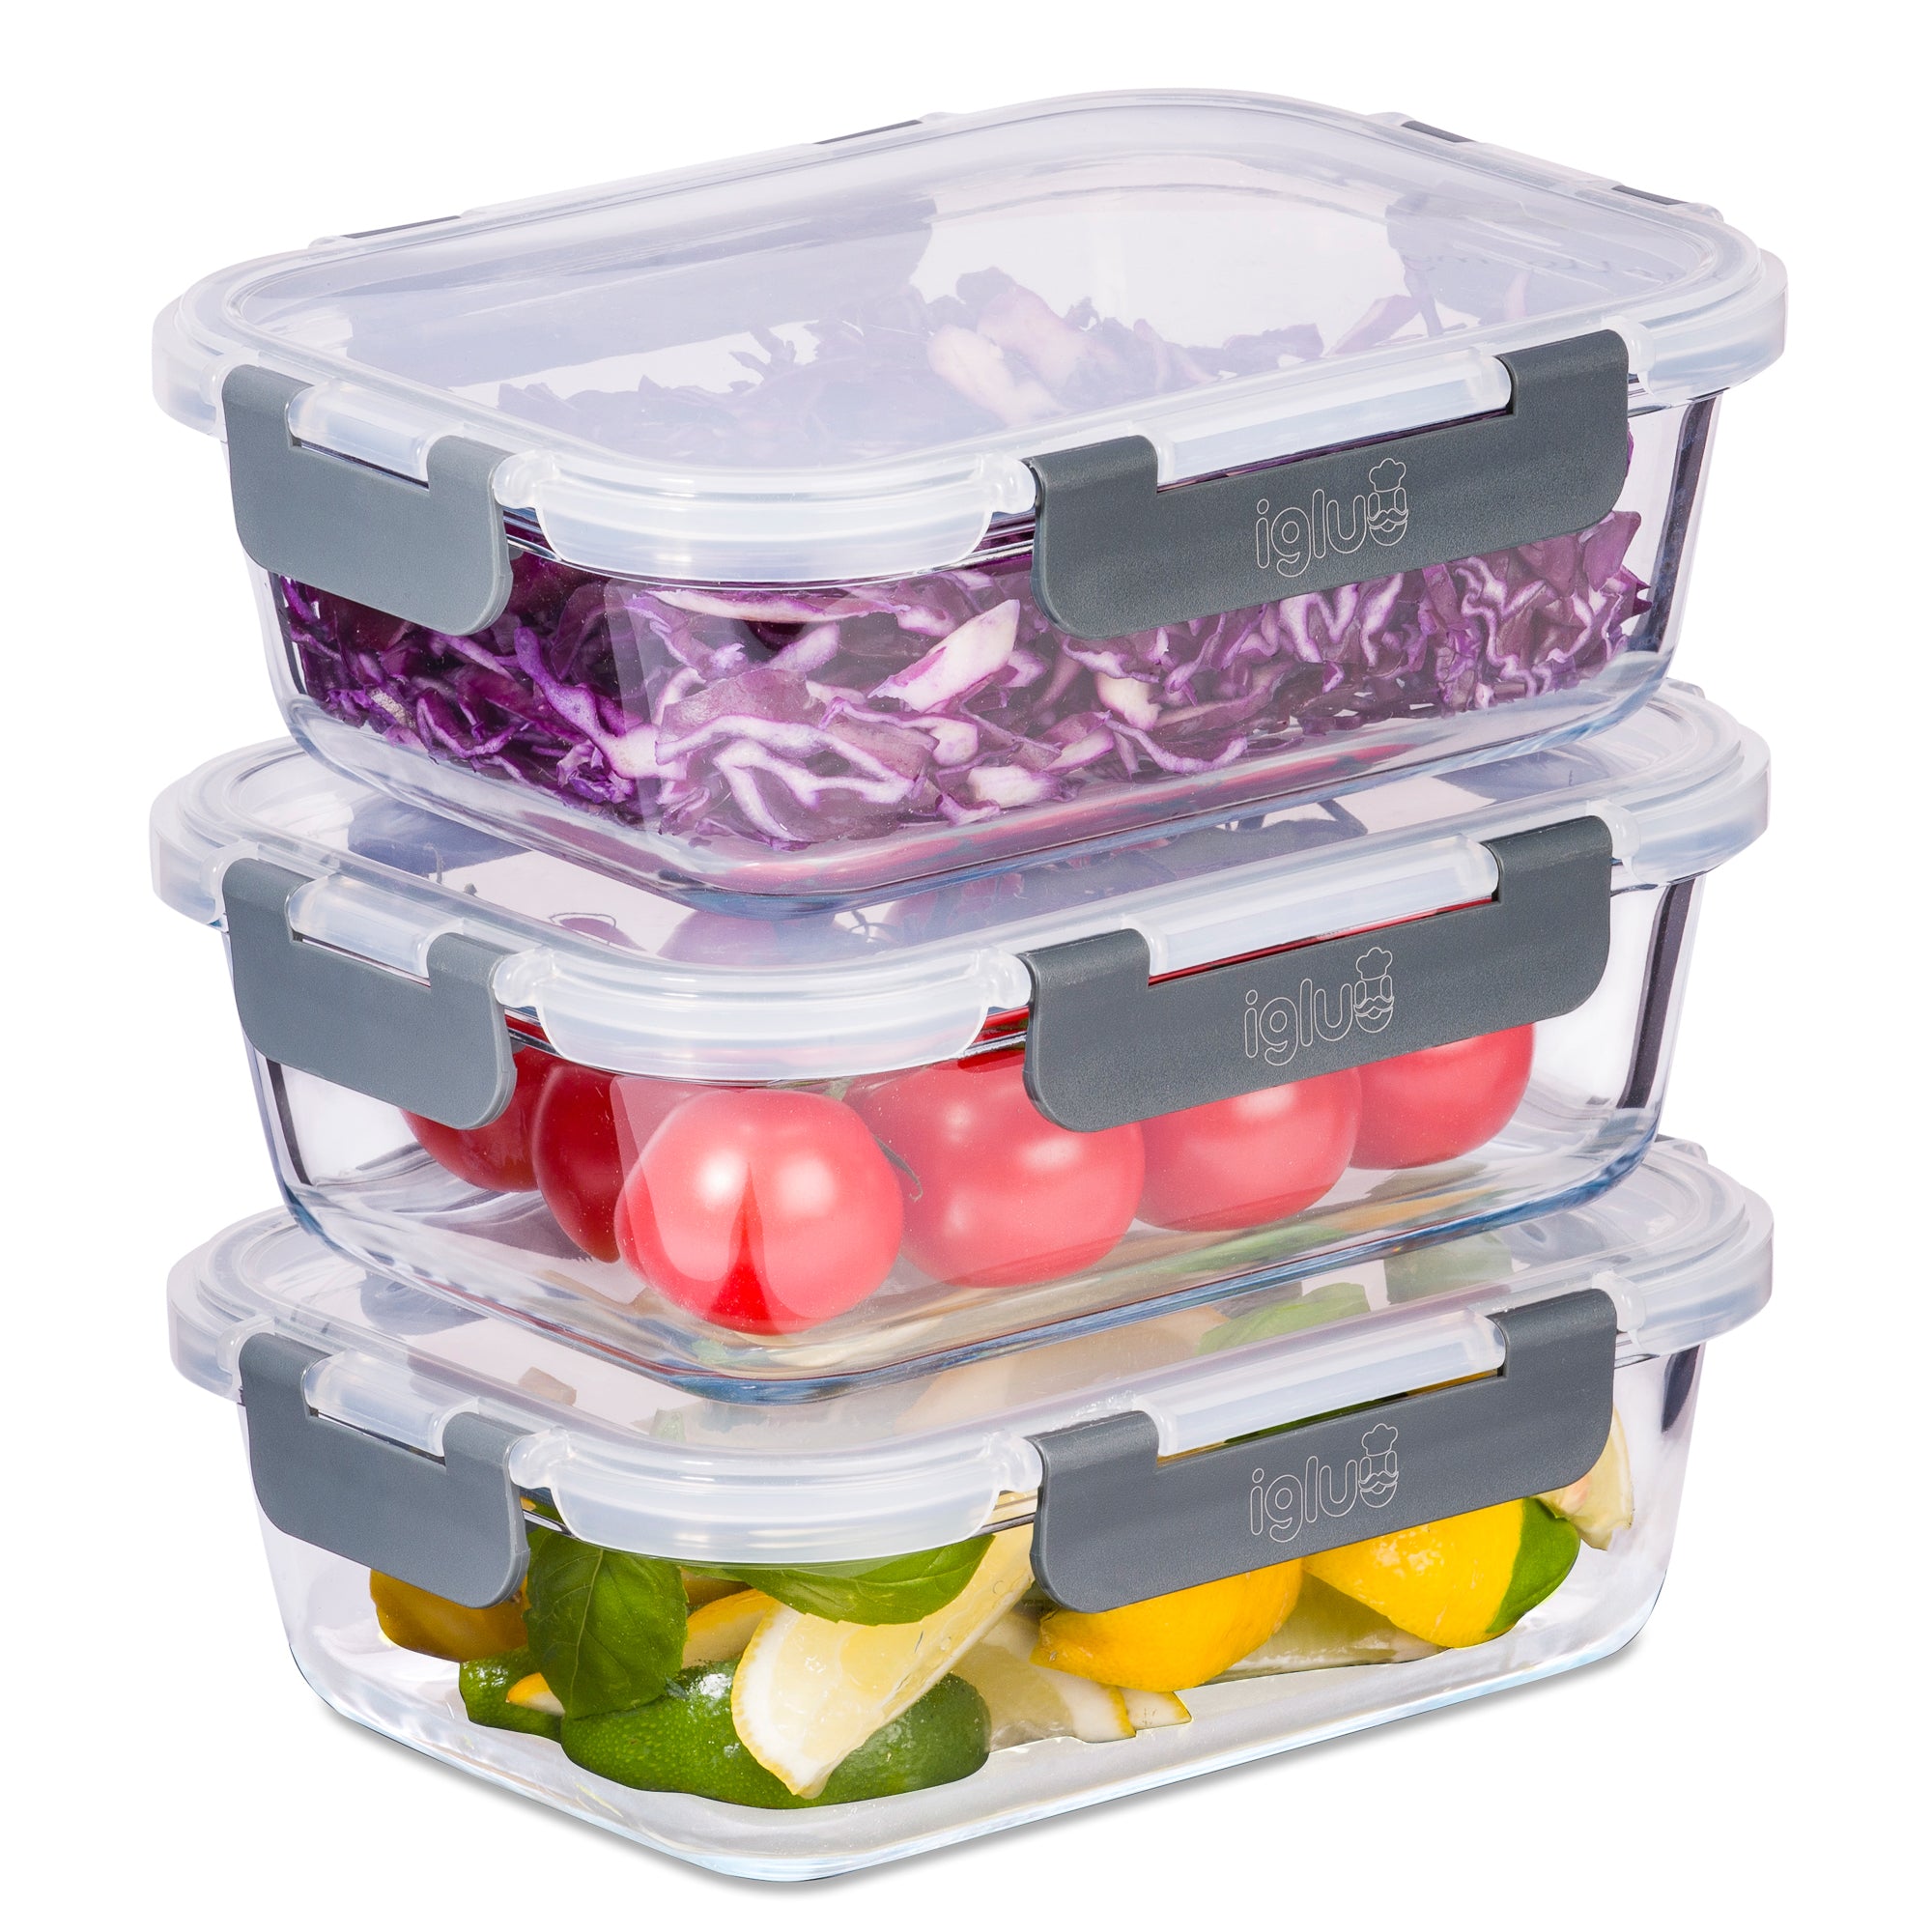 Glass Igluu Meal Prep 2 Compartment Container with Airtight SnapLock Lids -  Portion Control Food Storage - BPA Free - Microwavable, Dishwasher, Freezer  and Oven Safe [3 Pack]